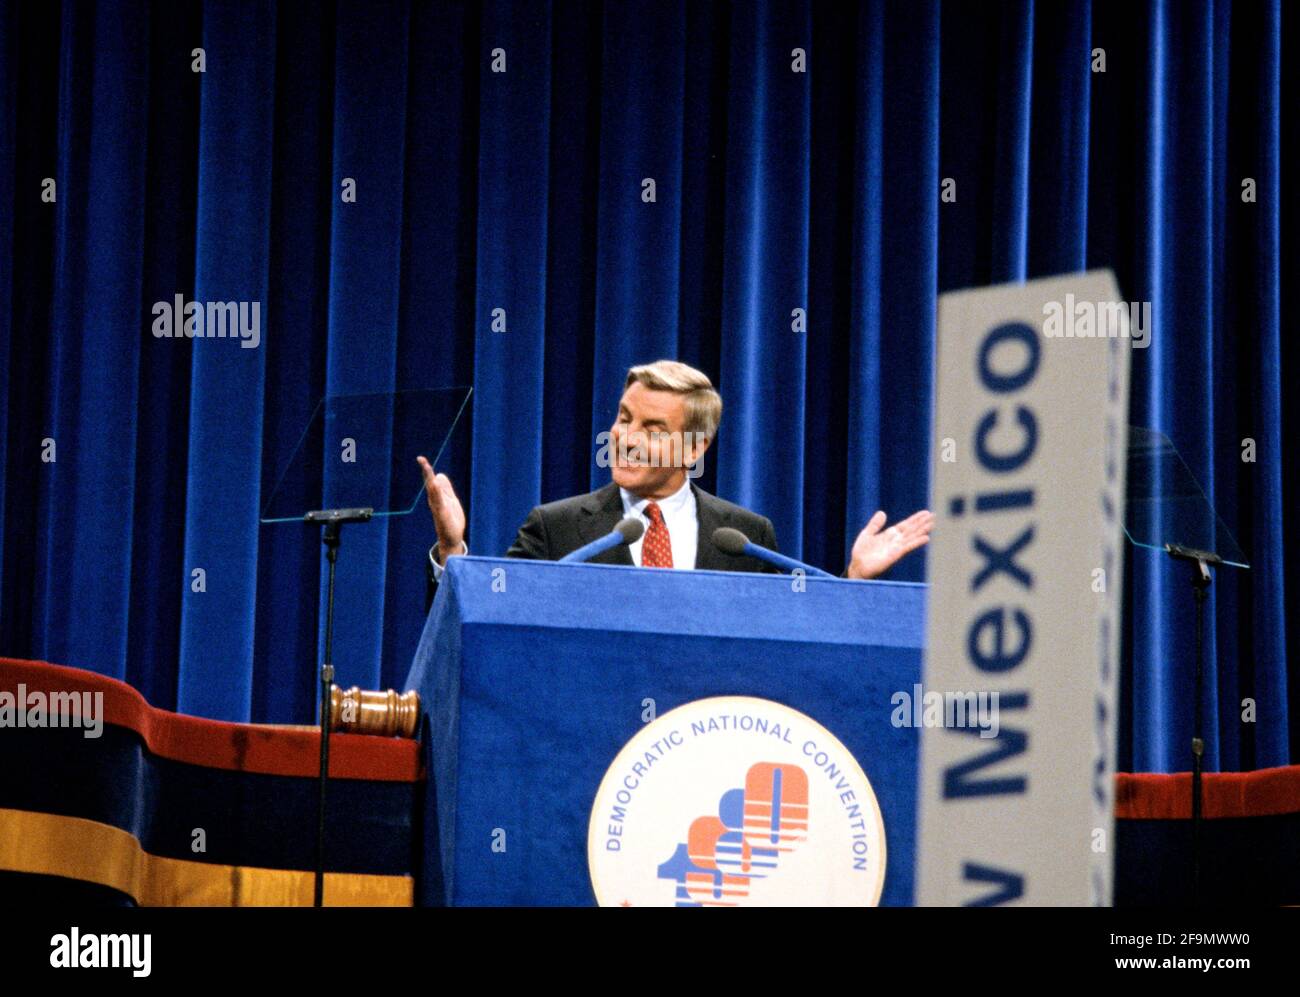 **FILE PHOTO** Walter Mondale Has Passed Away. United States Vice President President Walter Mondale delivers his speech accepting his party's nomination for reelection as President of the United States at the 1980 Democratic National Convention in Madison Square Garden in New York, New York on August 13, 1980. Credit: Howard L. Sachs/CNP /MediaPunch Stock Photo